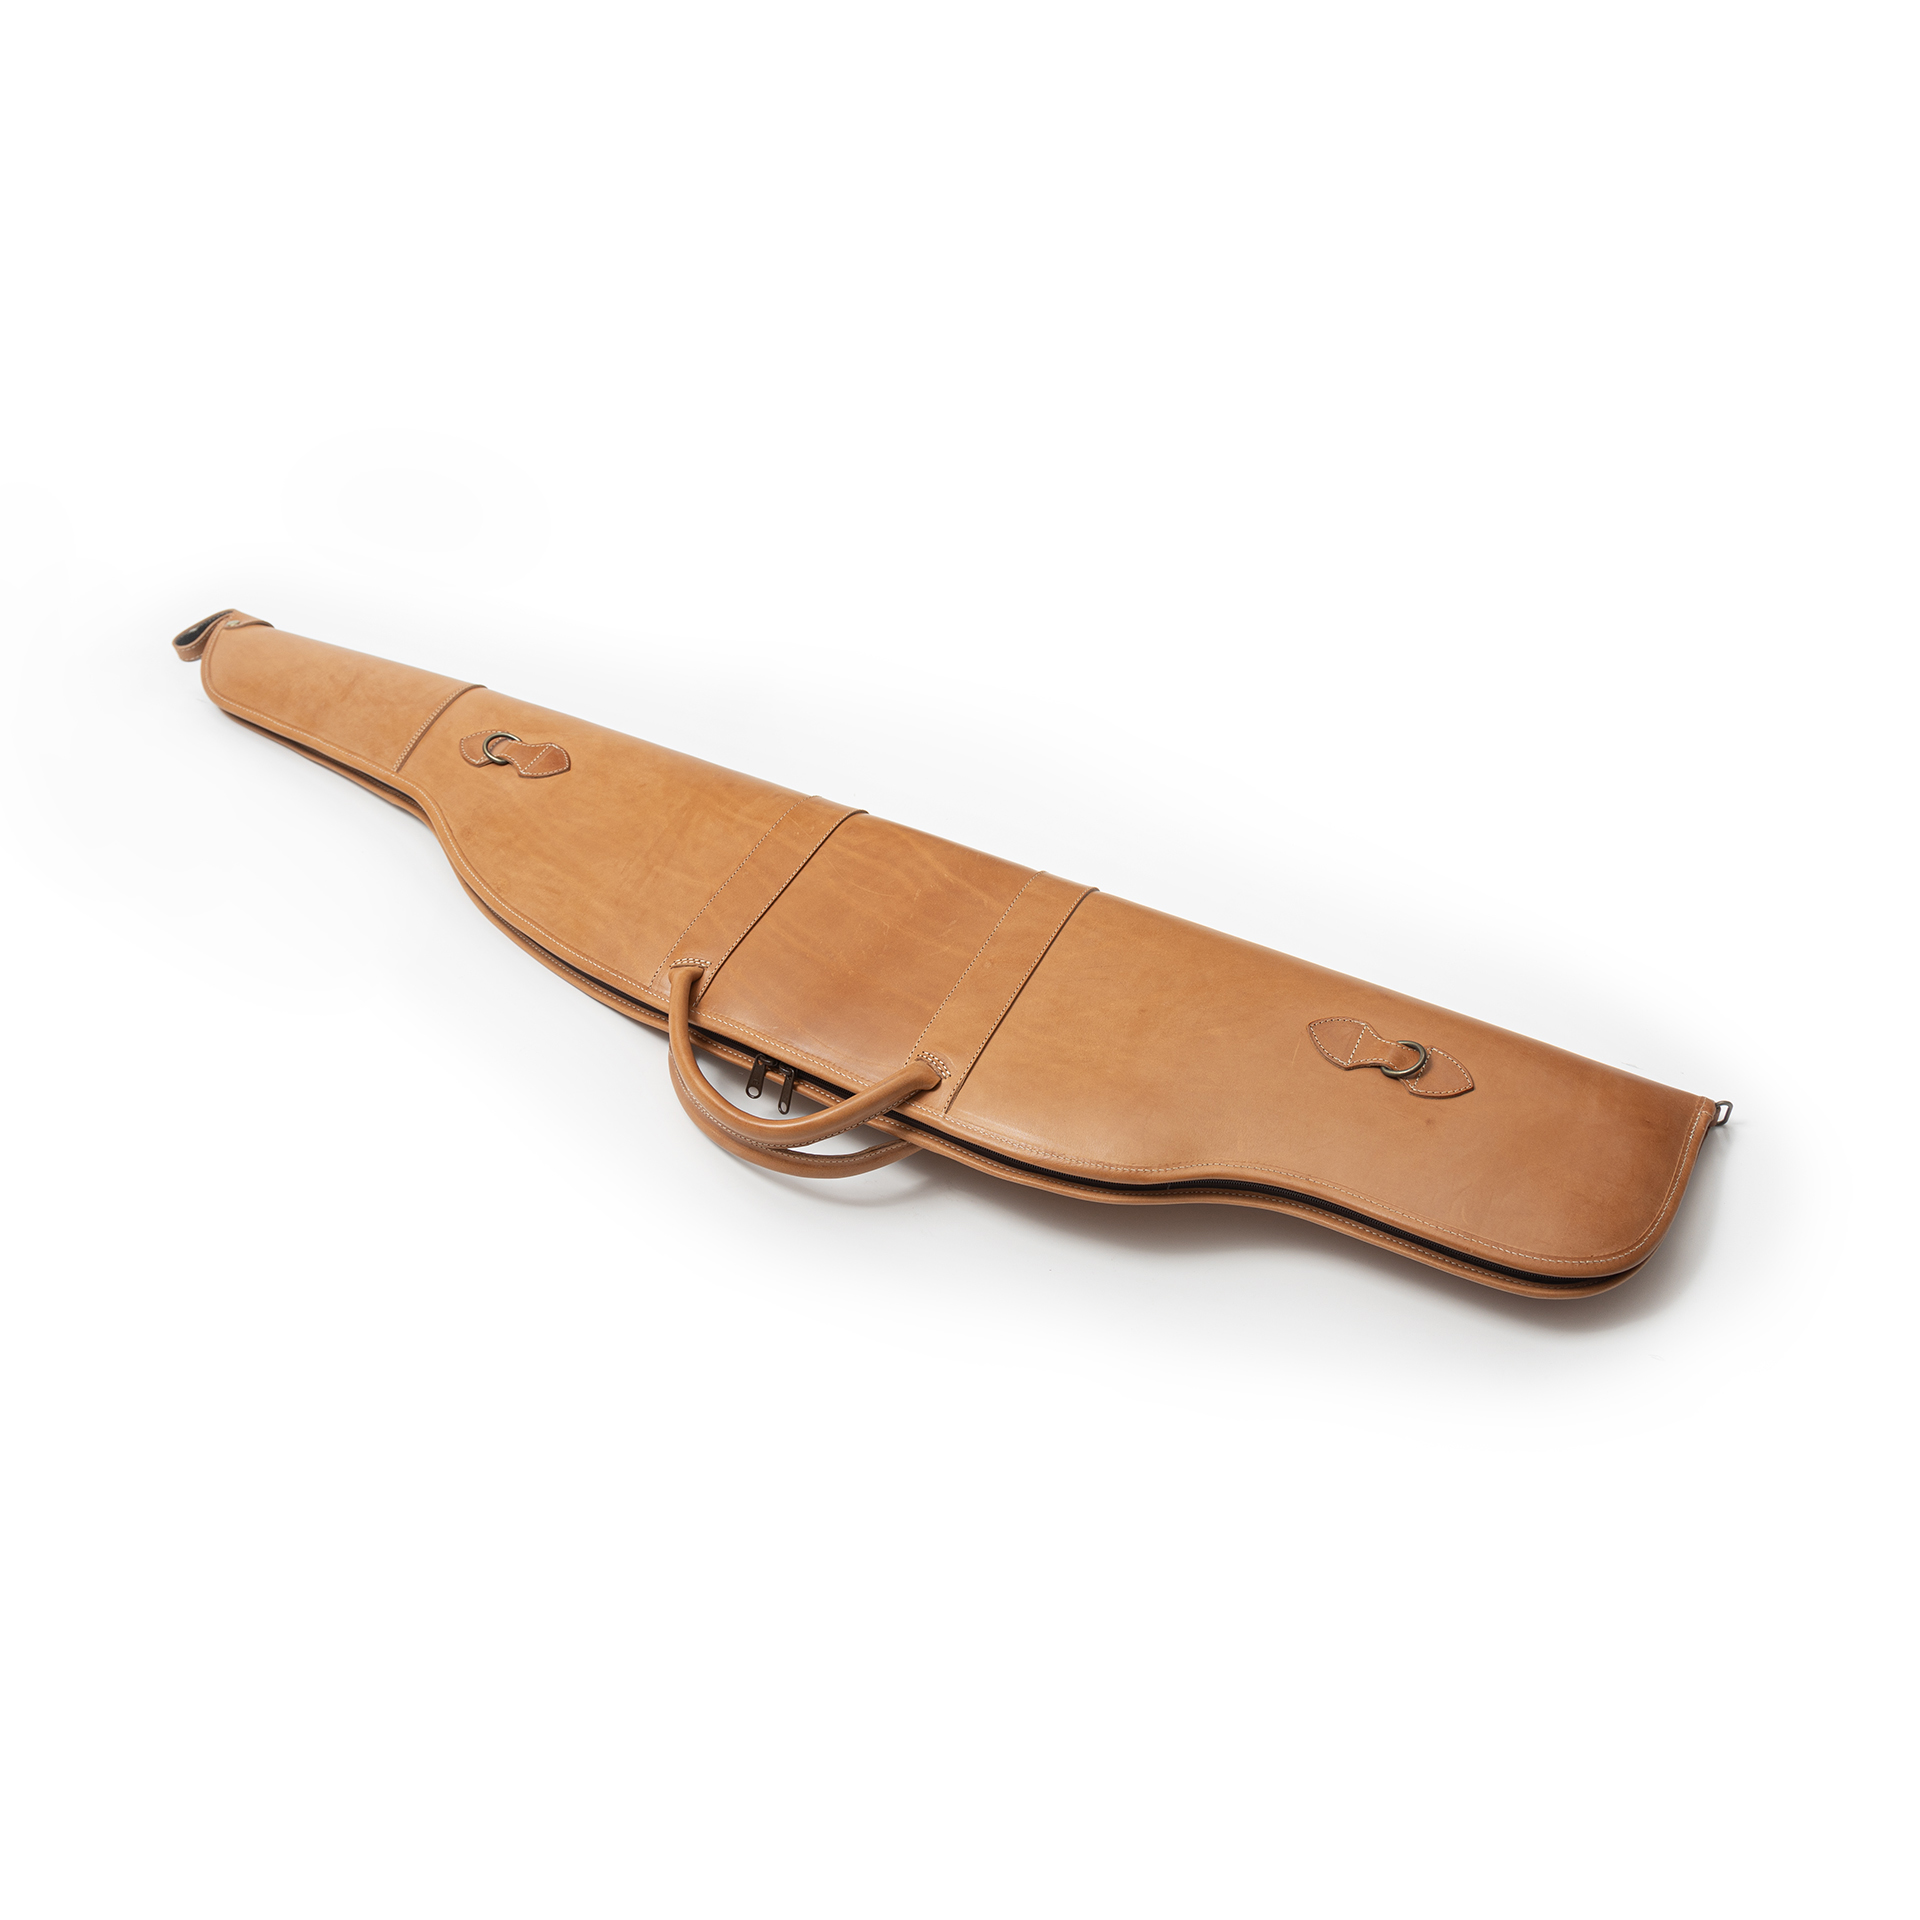 Rifle cover in genuine Italian leather – 32256-01